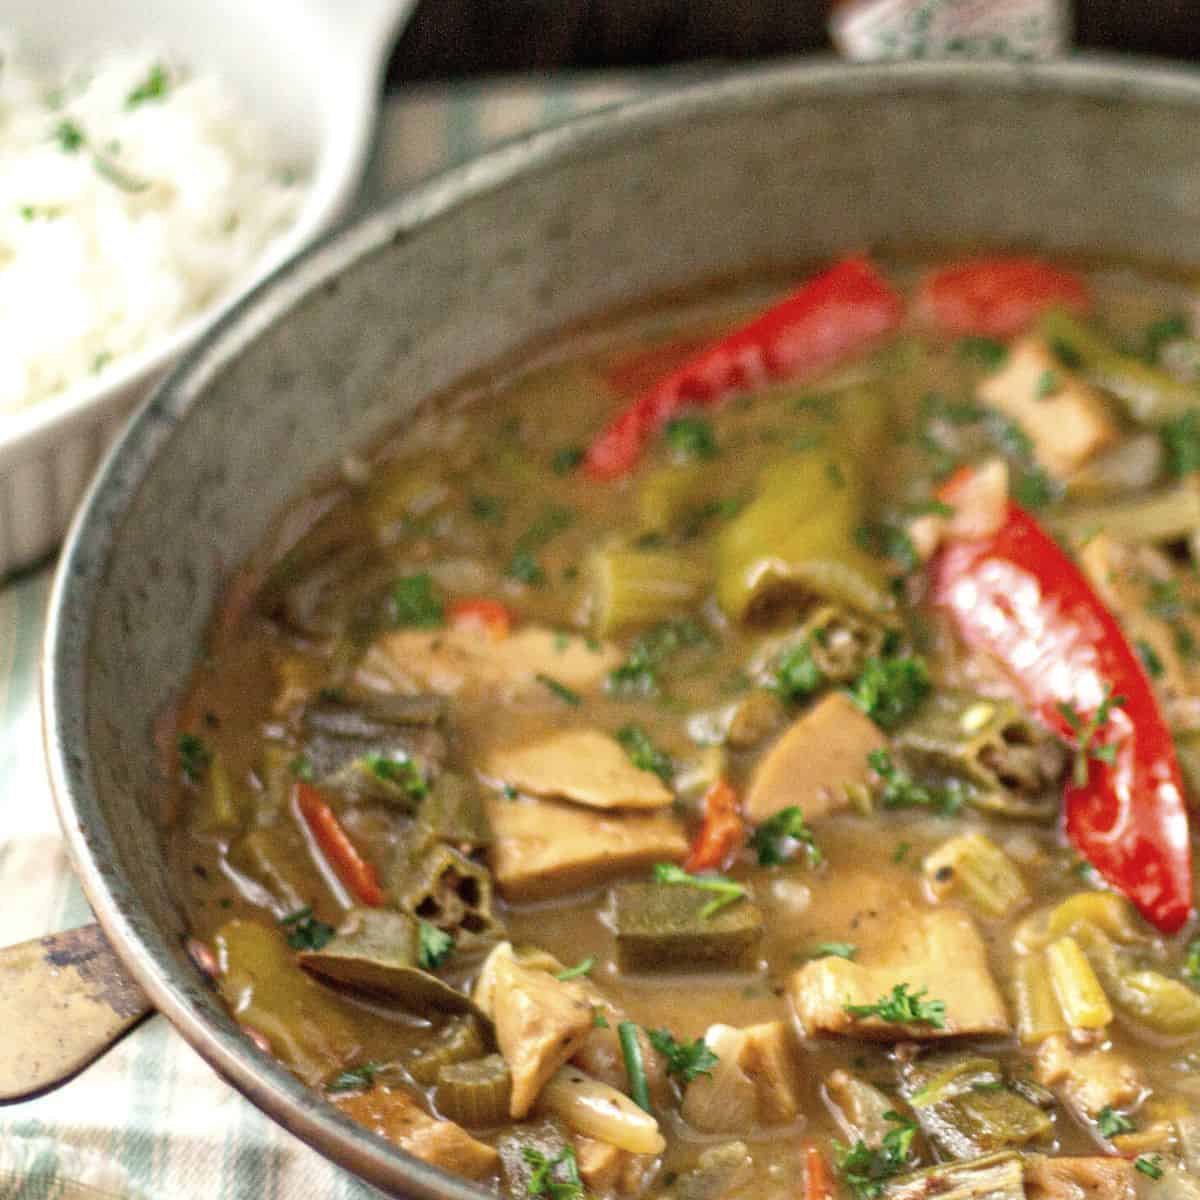 How to make Delicious and Easy Vegan Gumbo